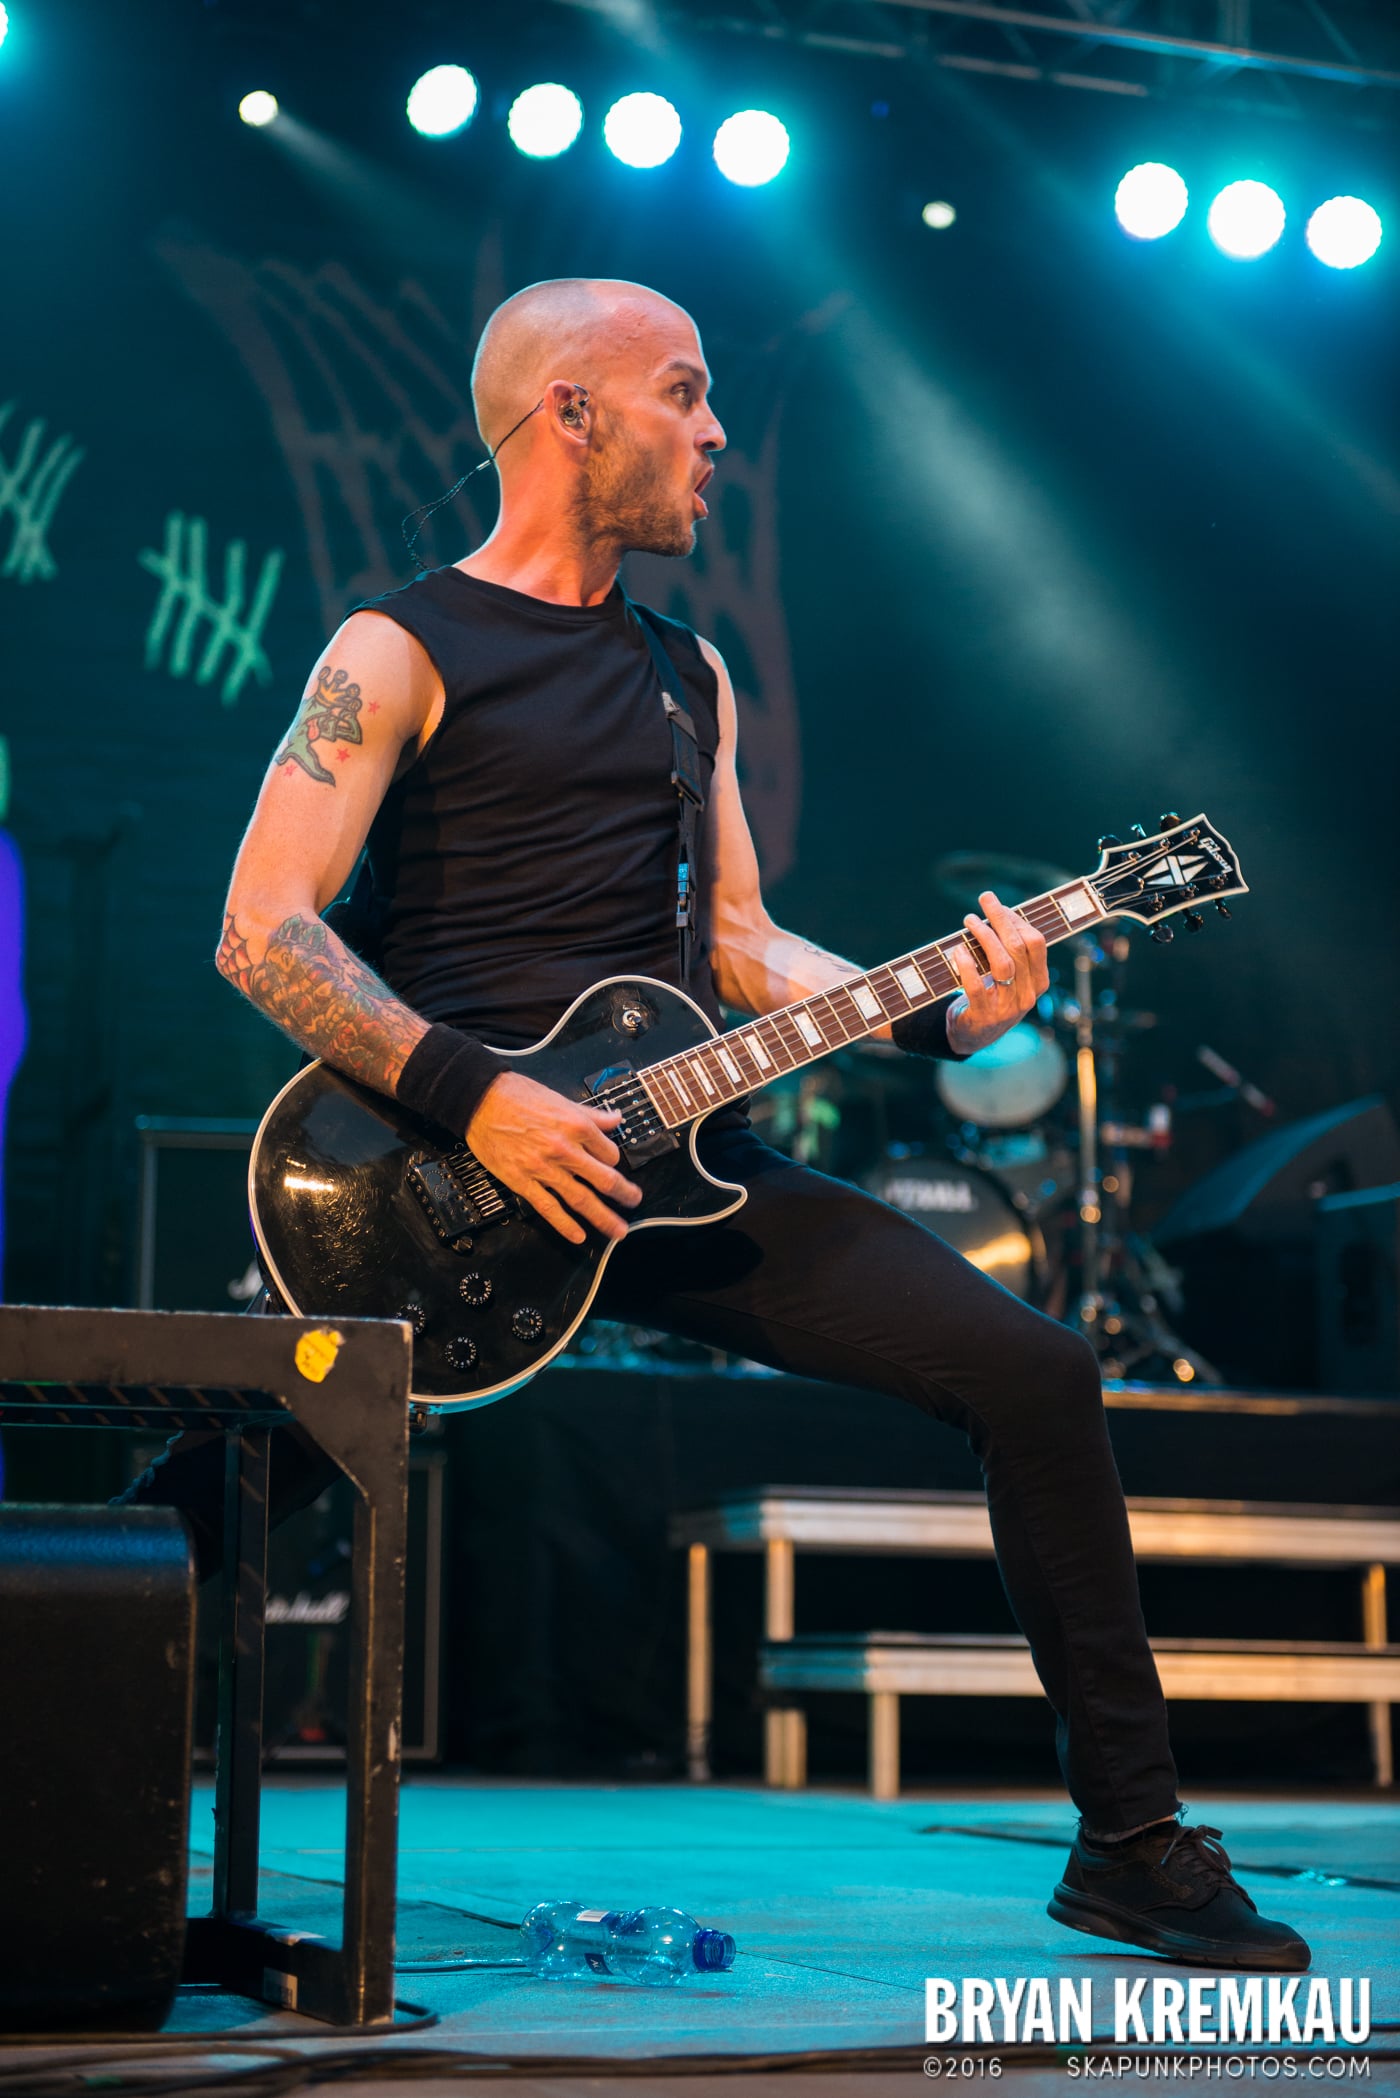 Rise Against @ Central Park SummerStage, NYC - 7.28.15 (39)